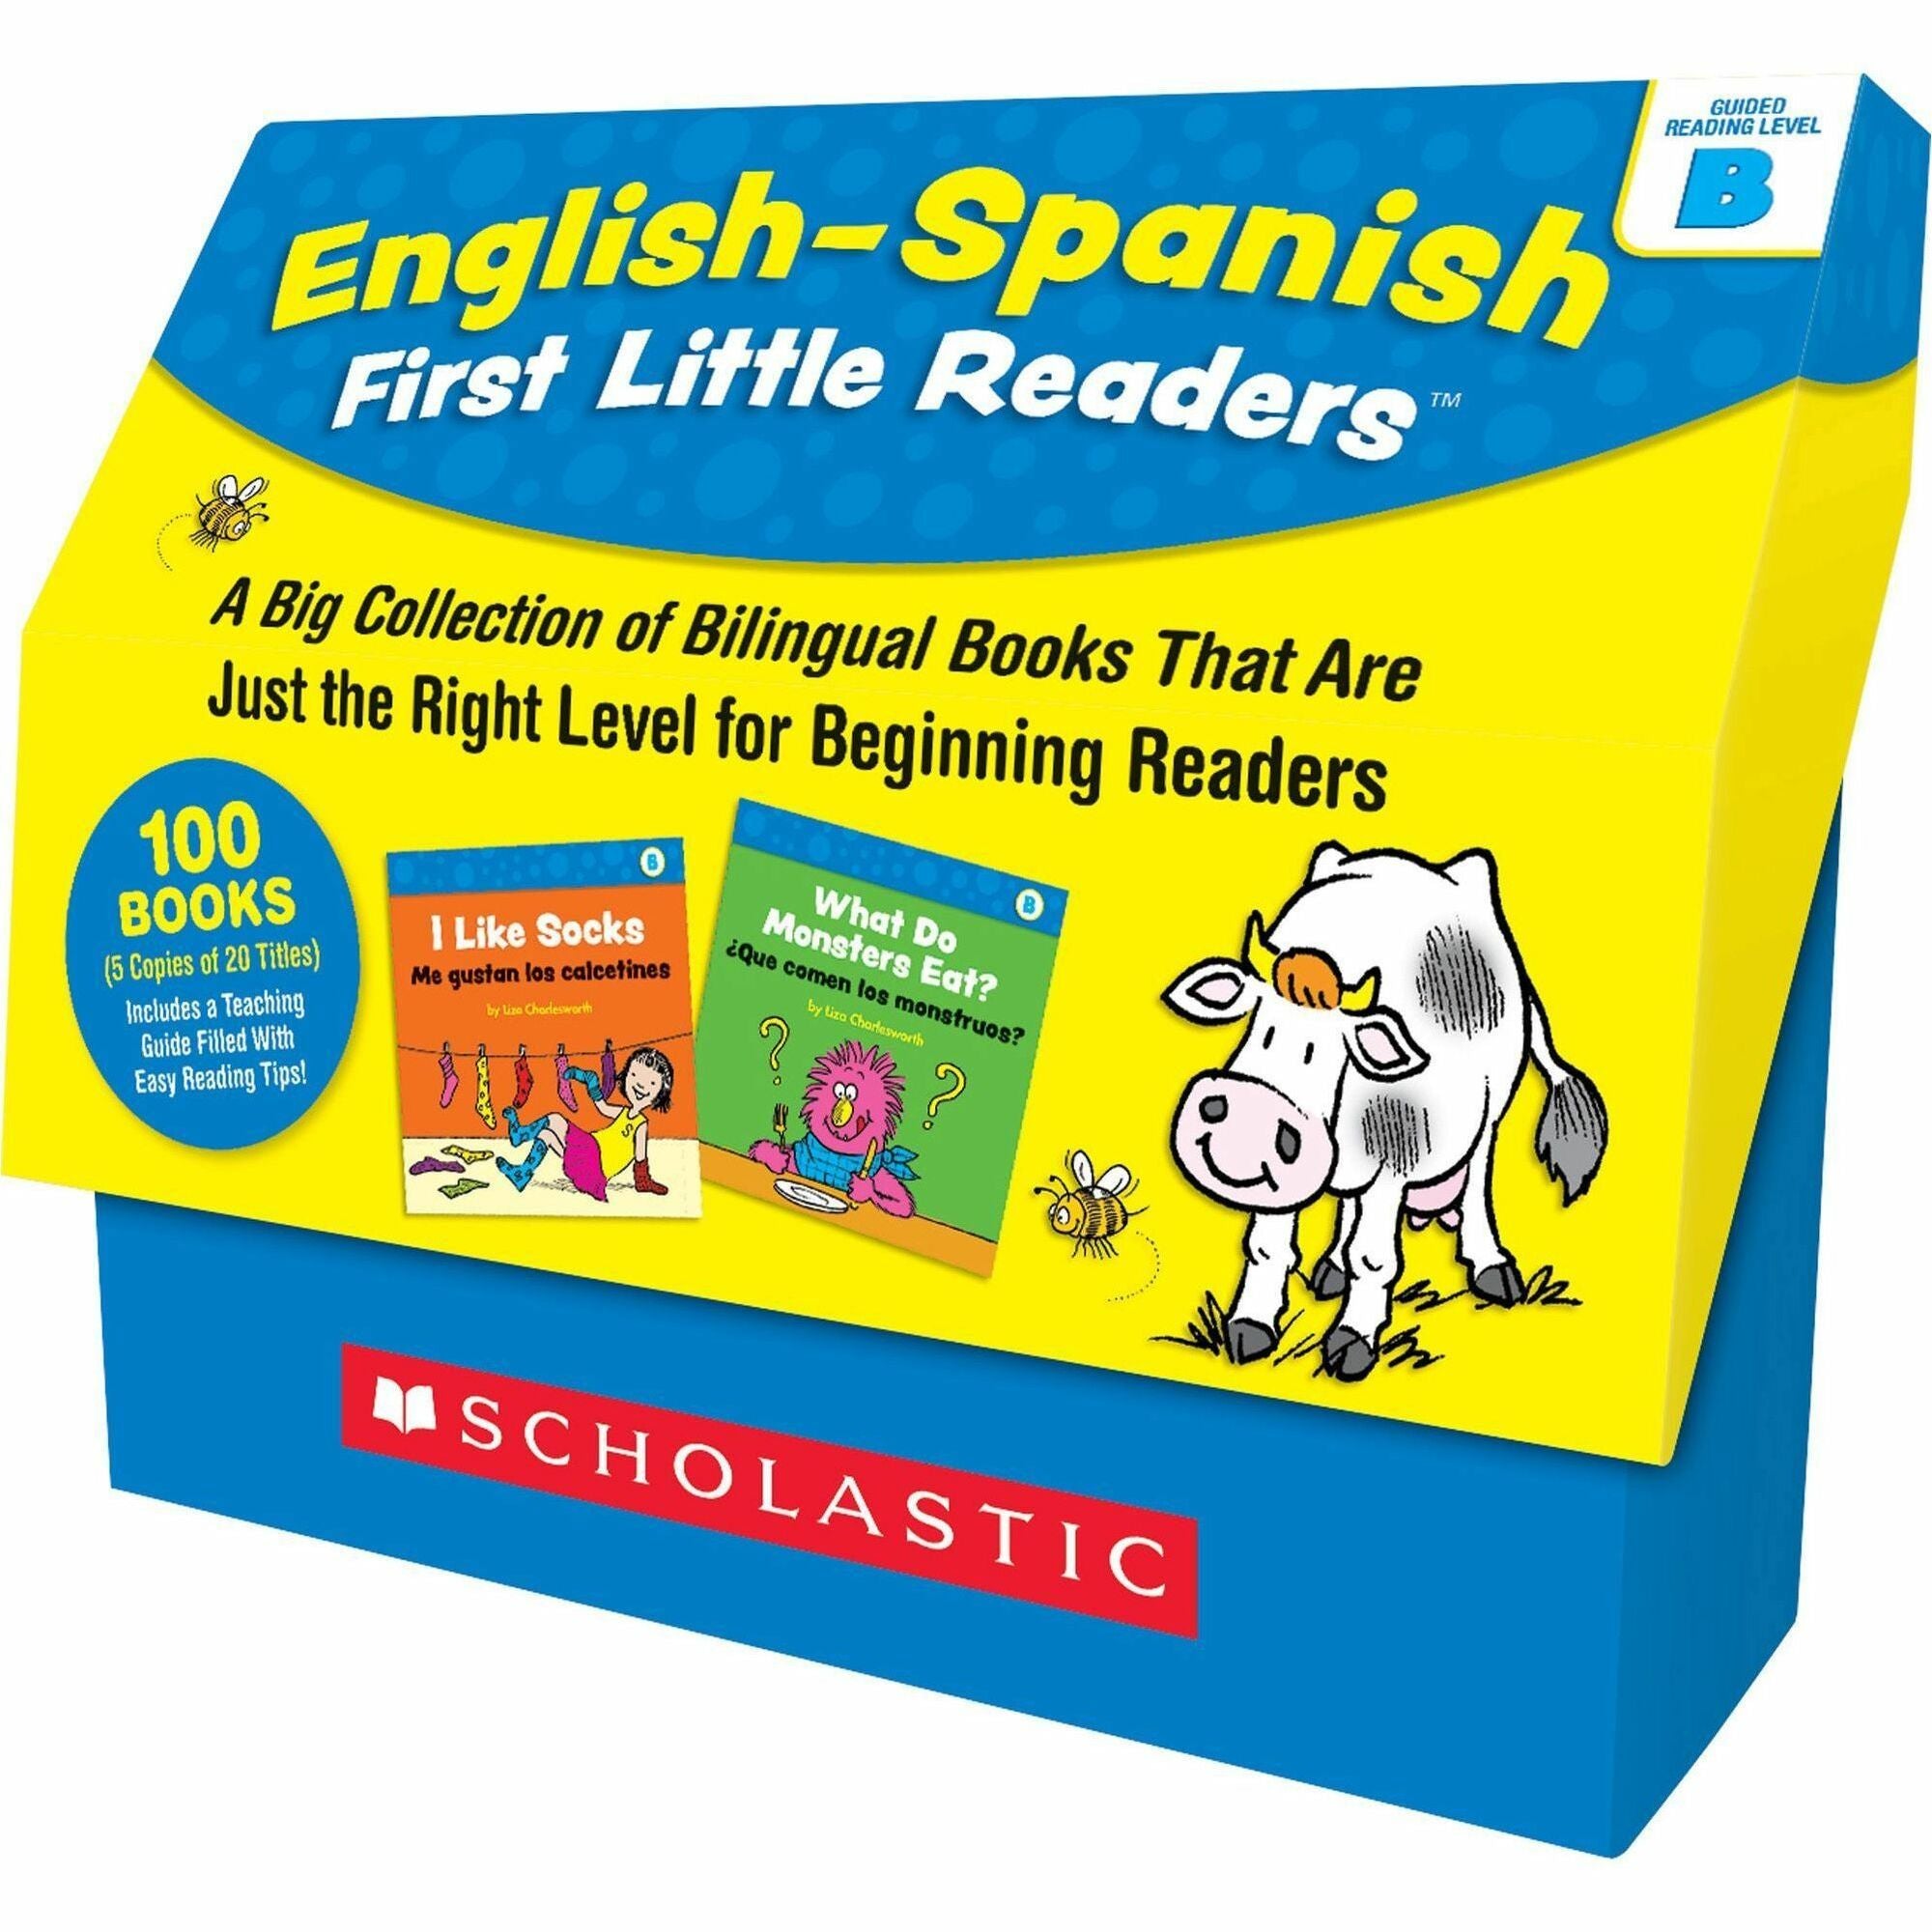 Scholastic First Little Readers Book Set Printed Book by Liza Charlesworth - 8 Pages - Scholastic Teaching Resources Publication - June 1, 2020 - Book - Grade Preschool-2 - English, Spanish - 1